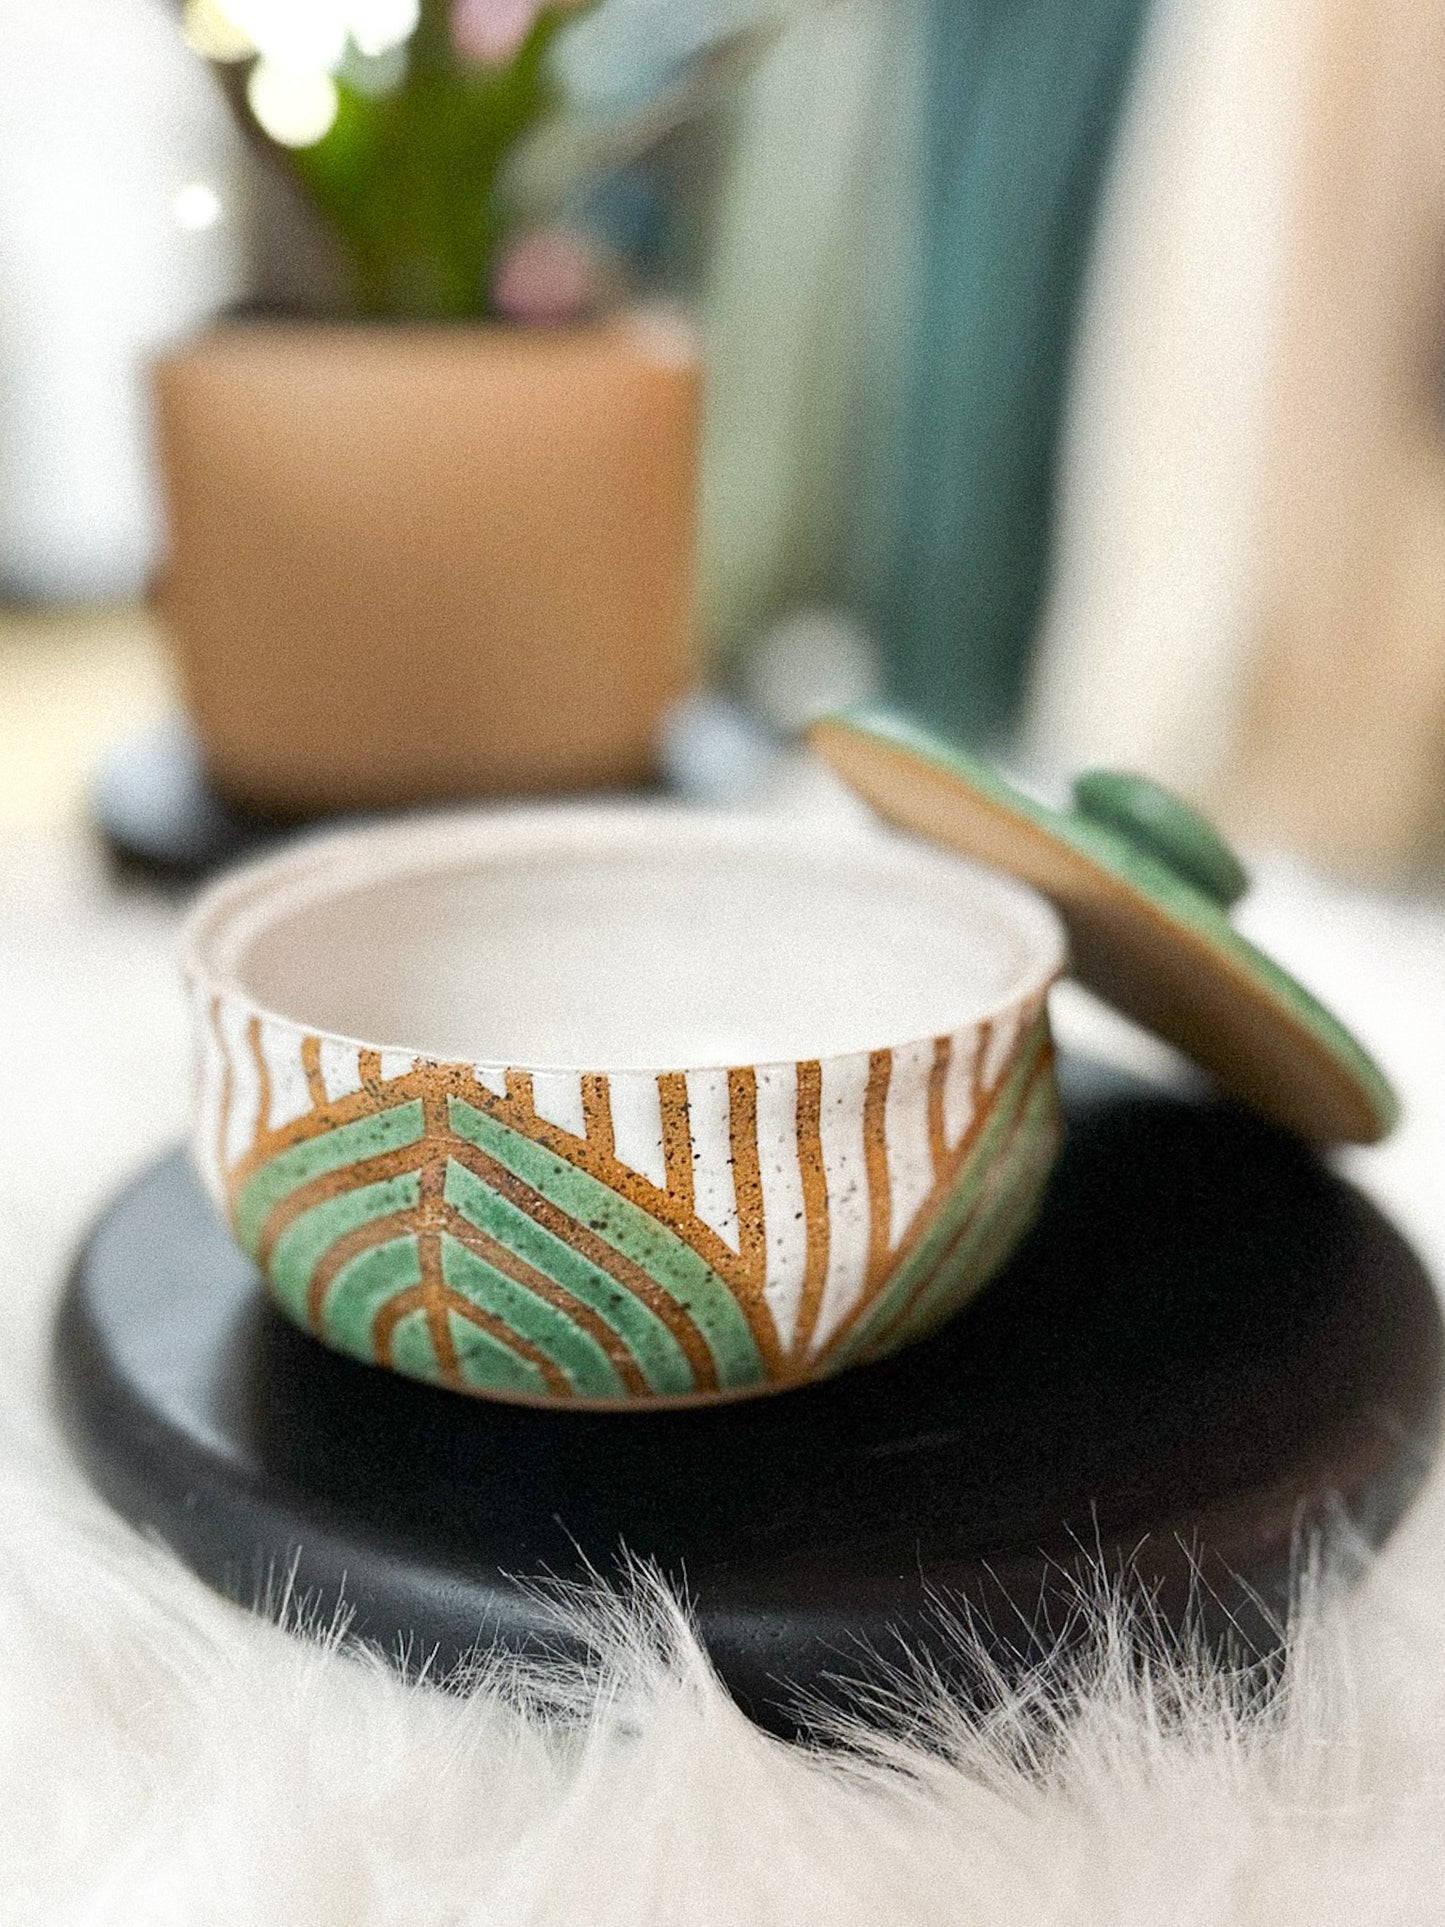 Green + White Leaf Sugar Bowl by Night School Knits and Pots #41